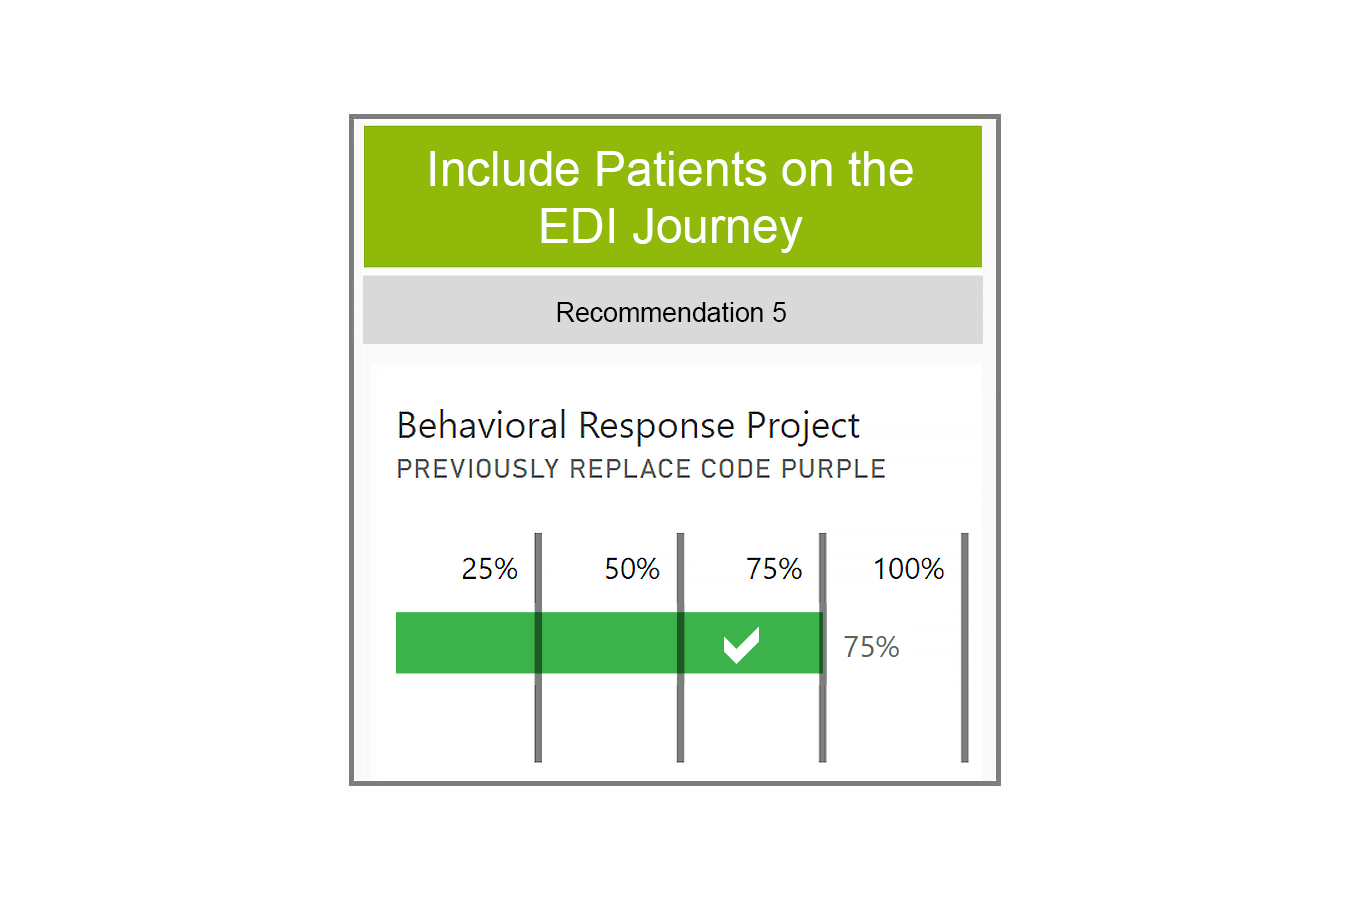 Include patients in EDI journey recommendation 5 graphic